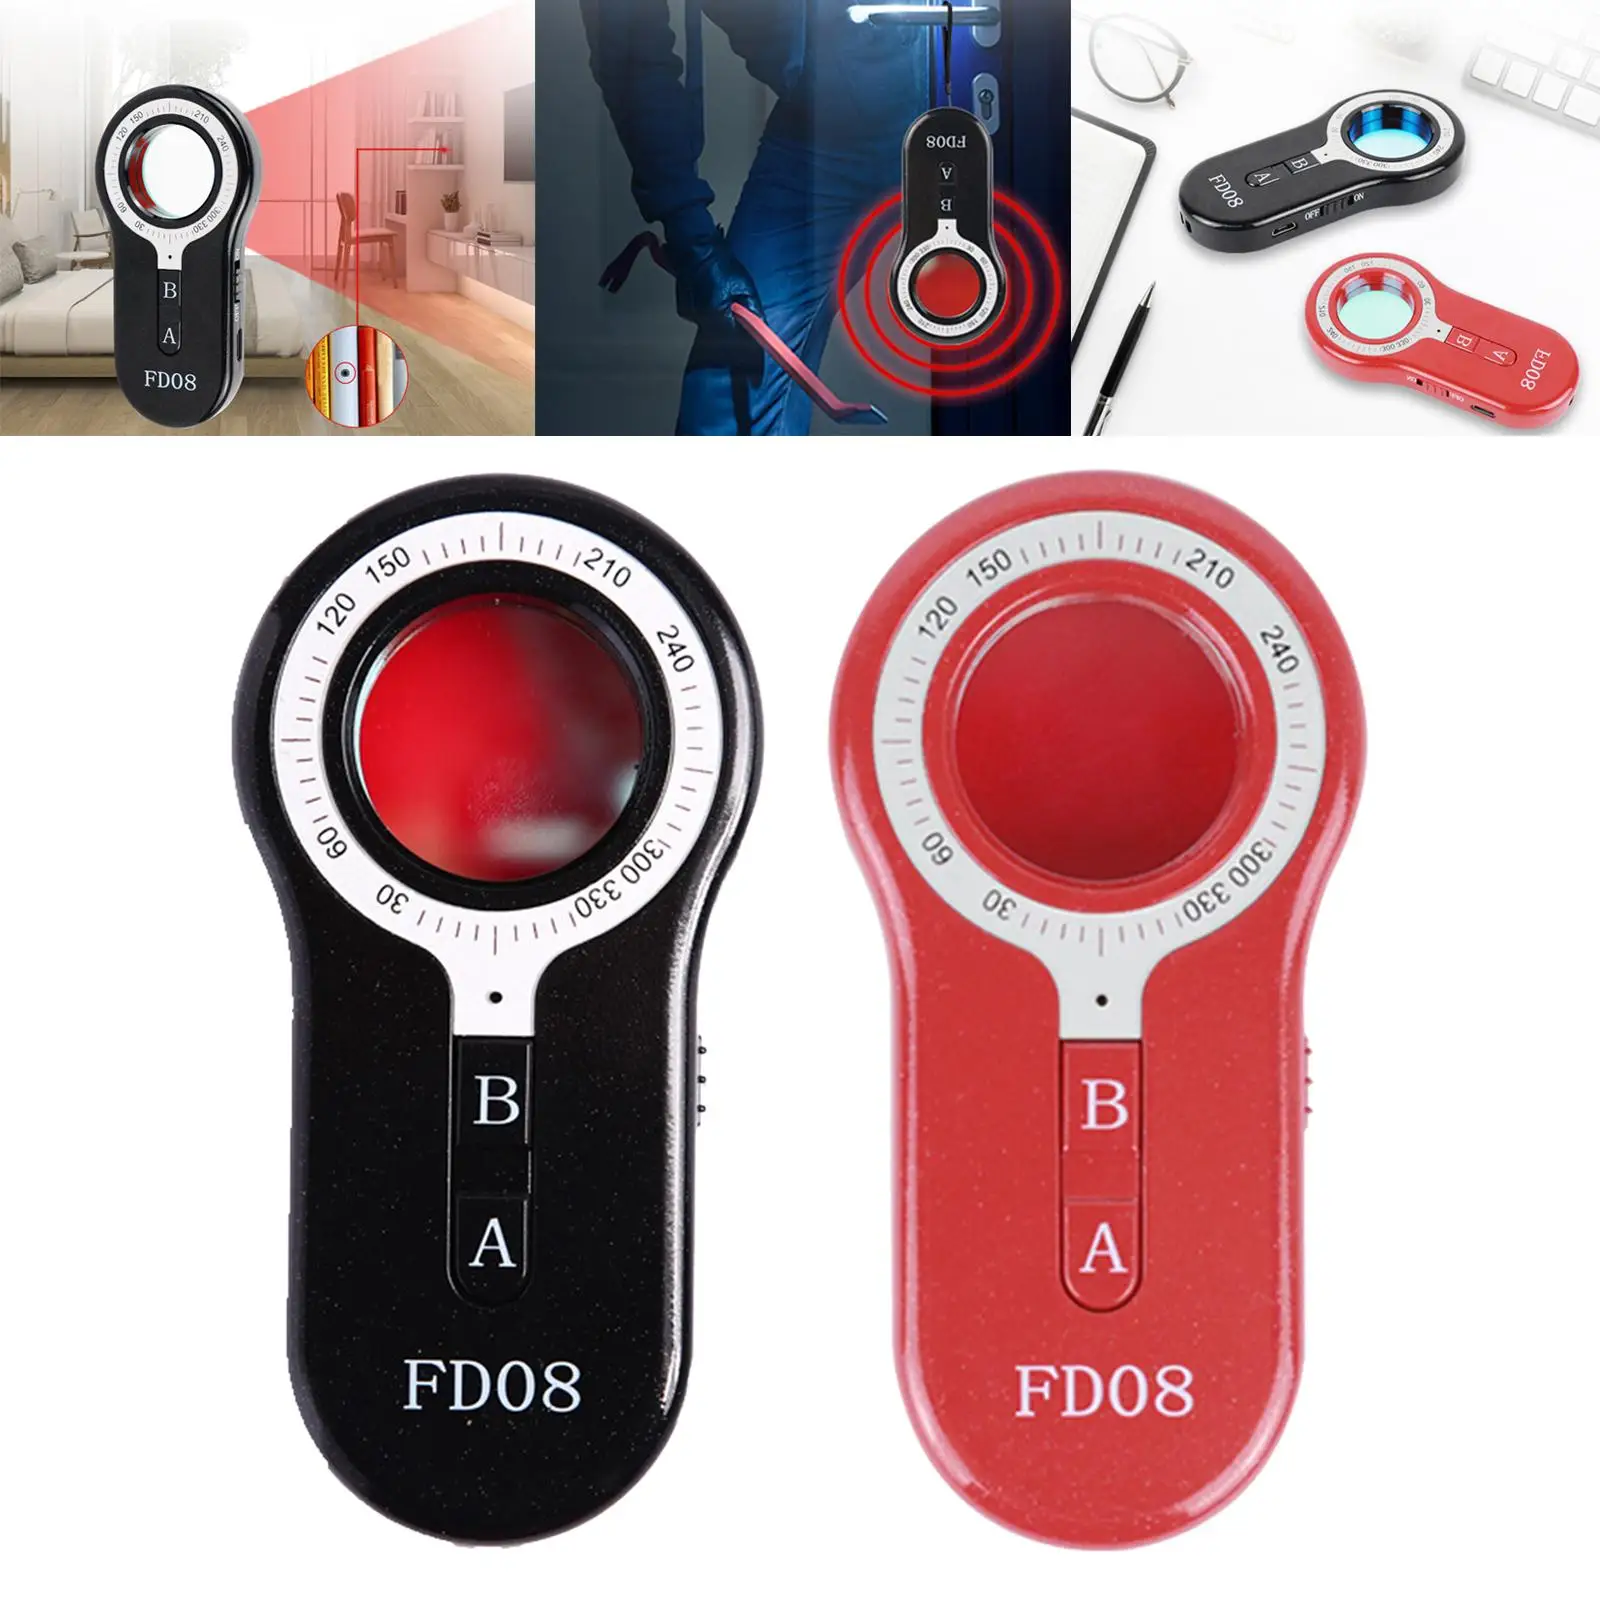 FD08 Wireless Detector Camera Privacy Protector Portable Multifunctional IR Scanner for Personal Alarm Home Security Device